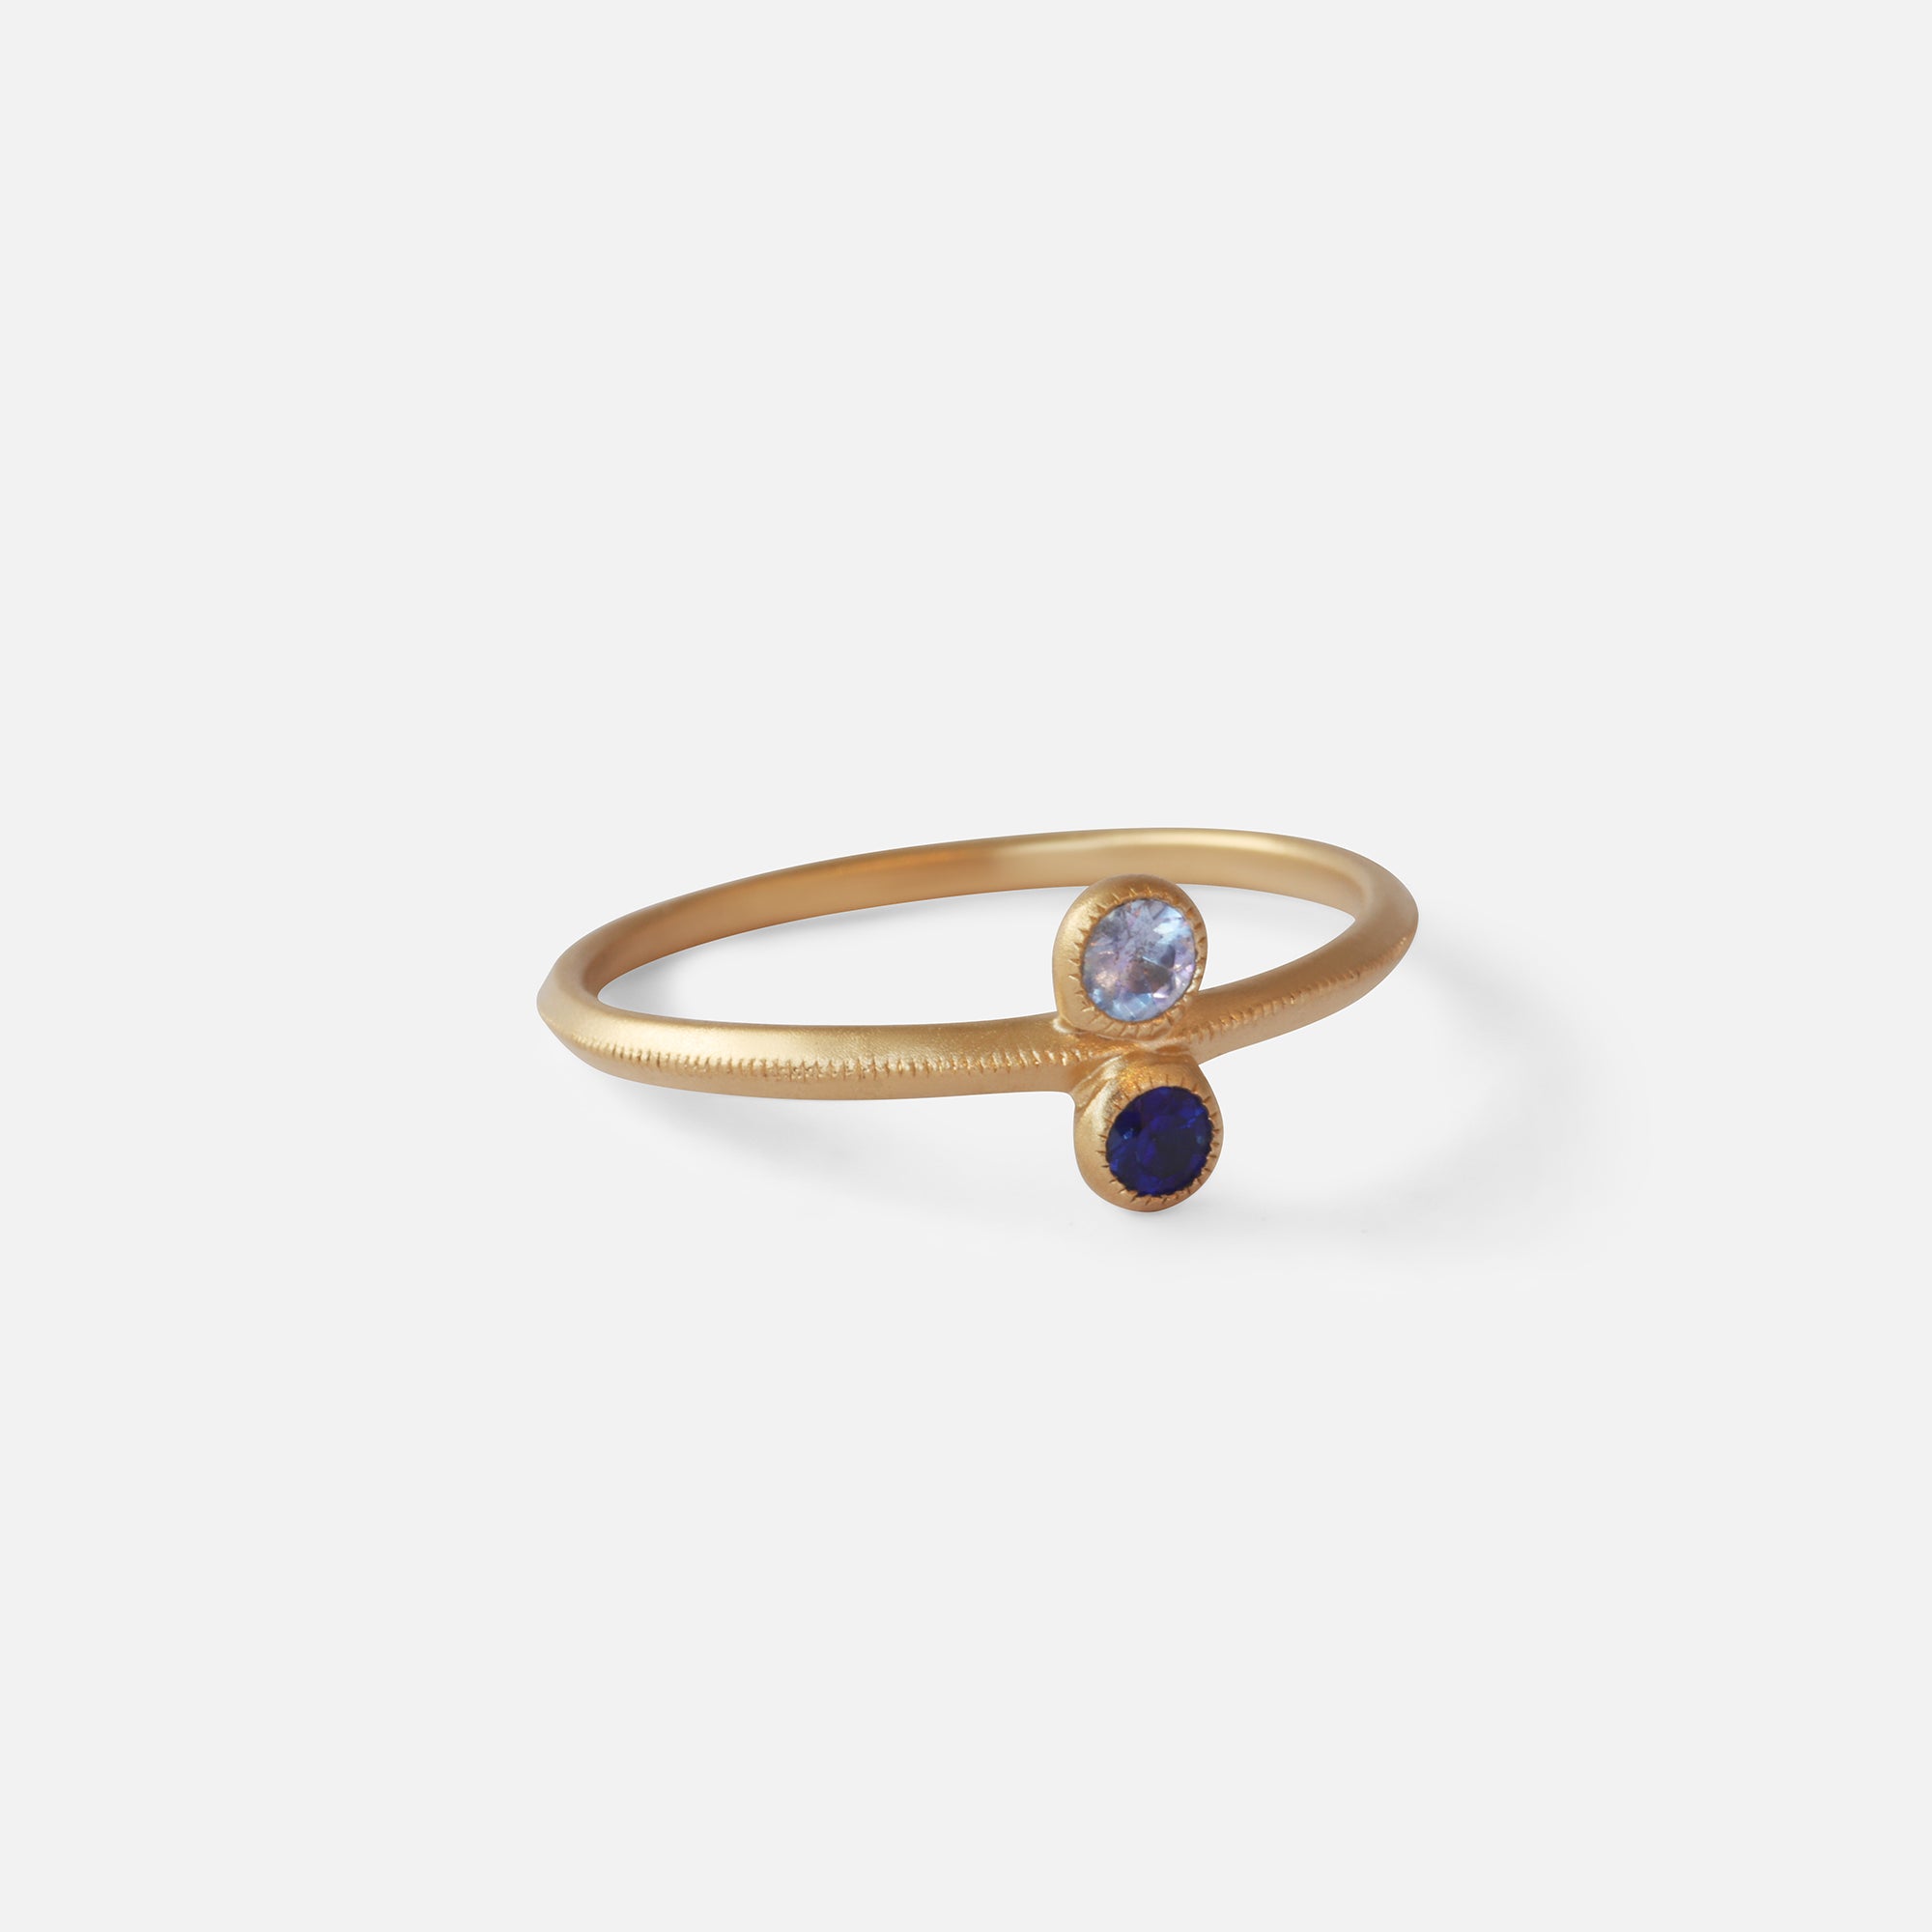 Melee Ball / Toi et Moi / Blue and Light Blue Sapphire Ring By fitzgerald jewelry